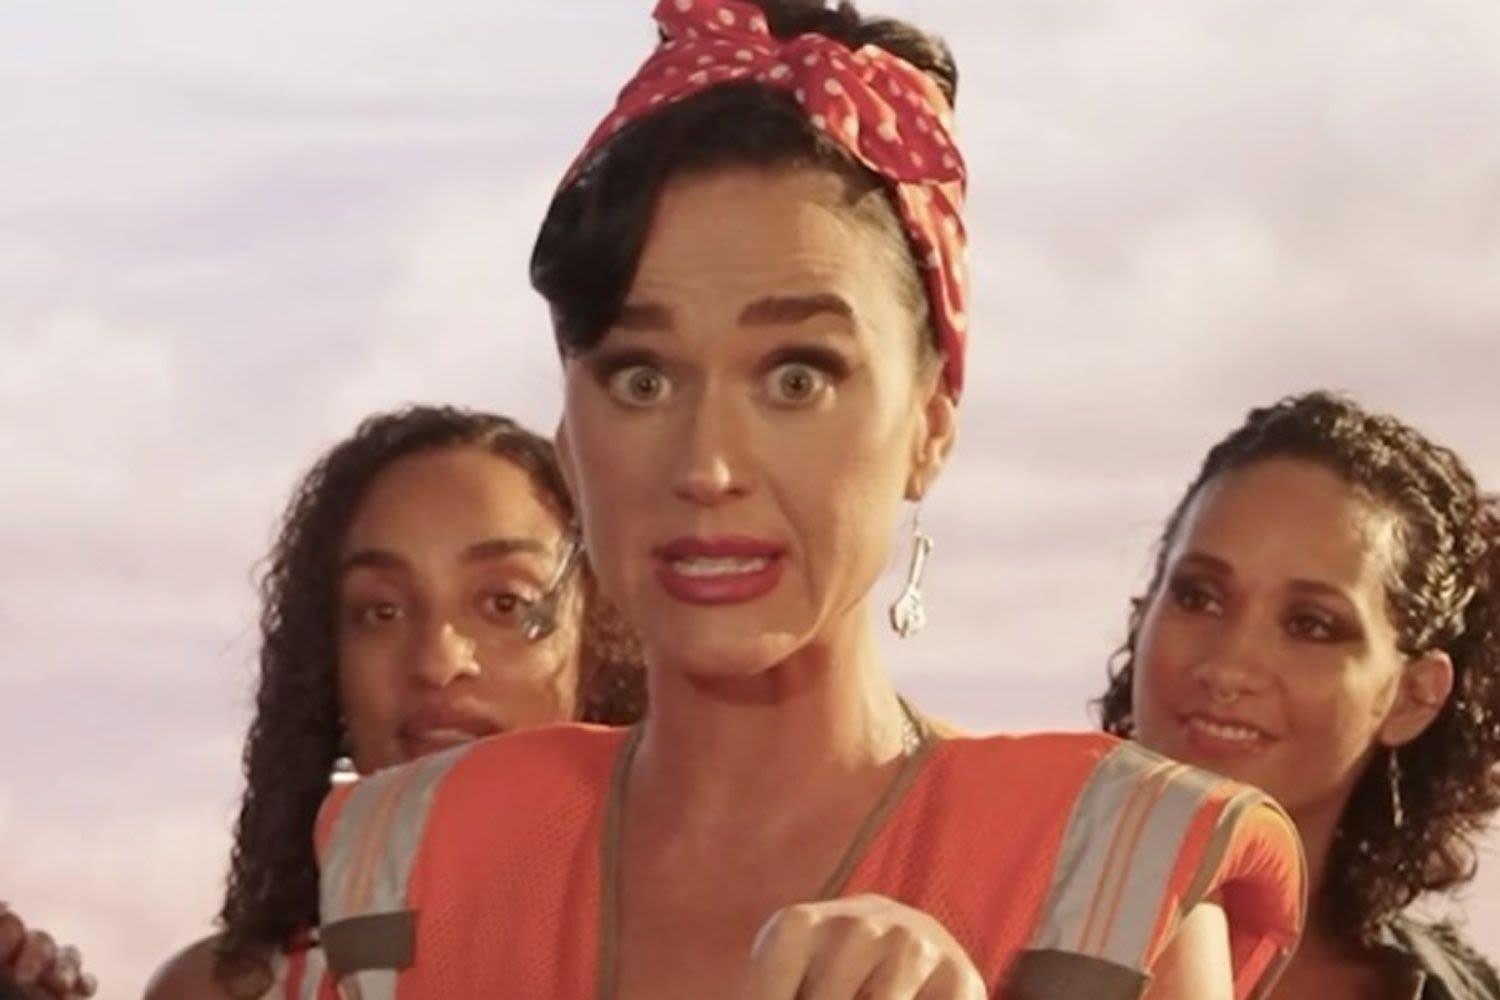 Katy Perry Takes Fans BTS of ‘Woman’s World’ Video While Wearing a Rosie the Riveter Headscarf: ‘Girlboss S---’